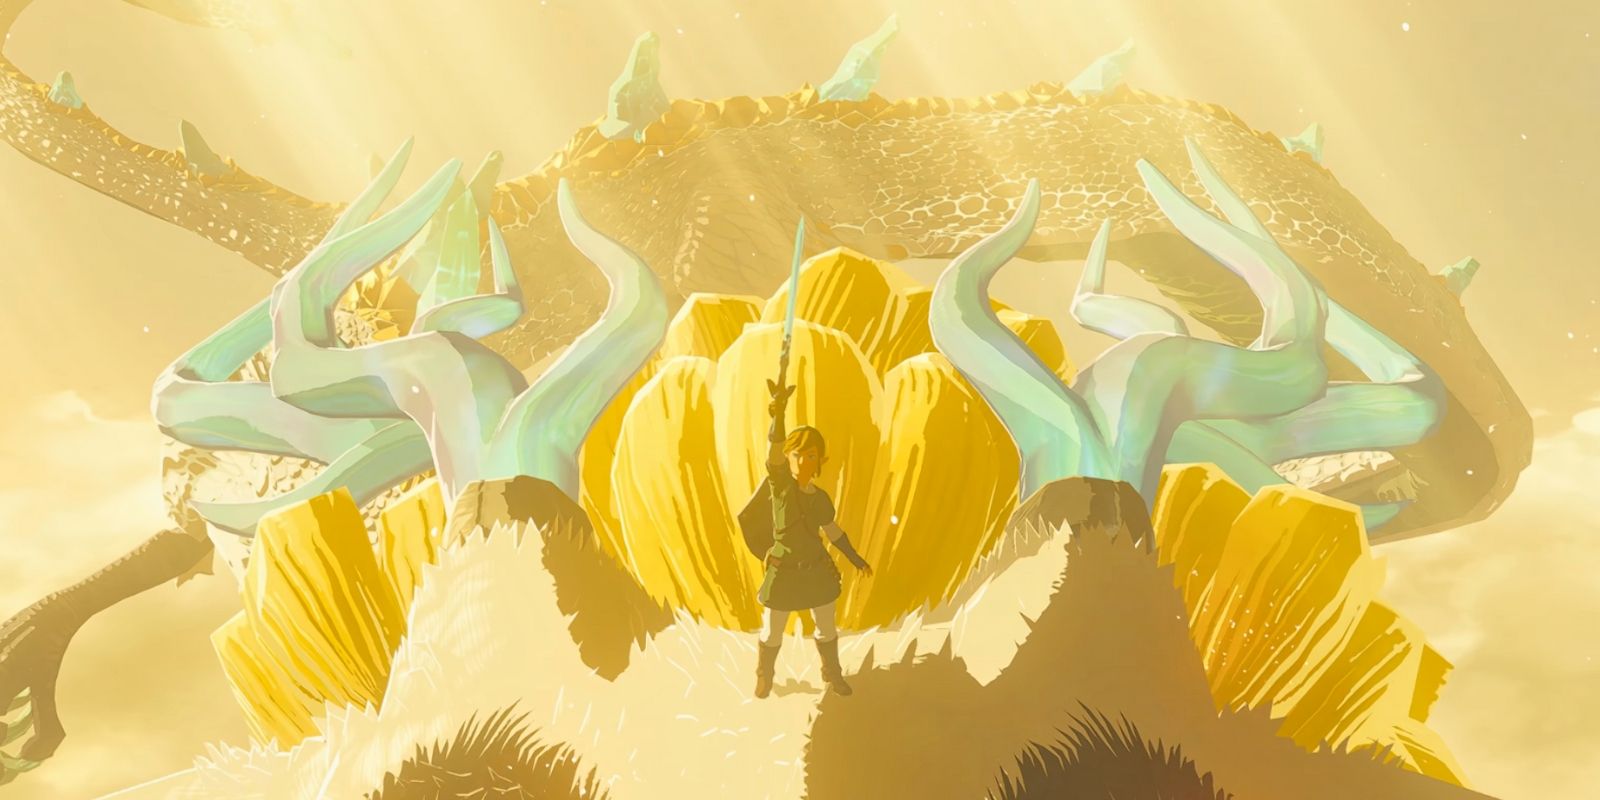 Link holding up the Master Sword on top of a Light dragon